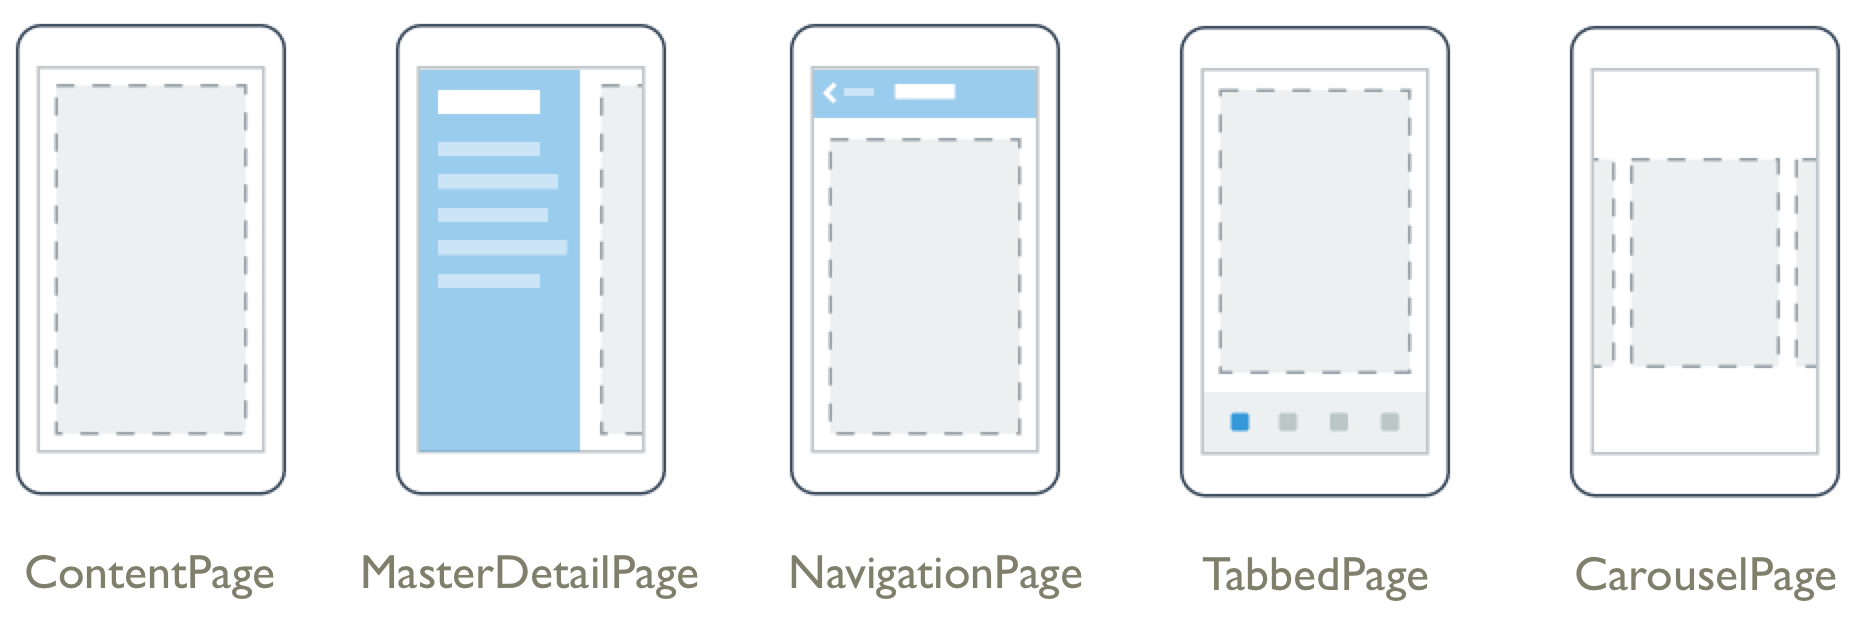 Xamarin.Forms Page Types